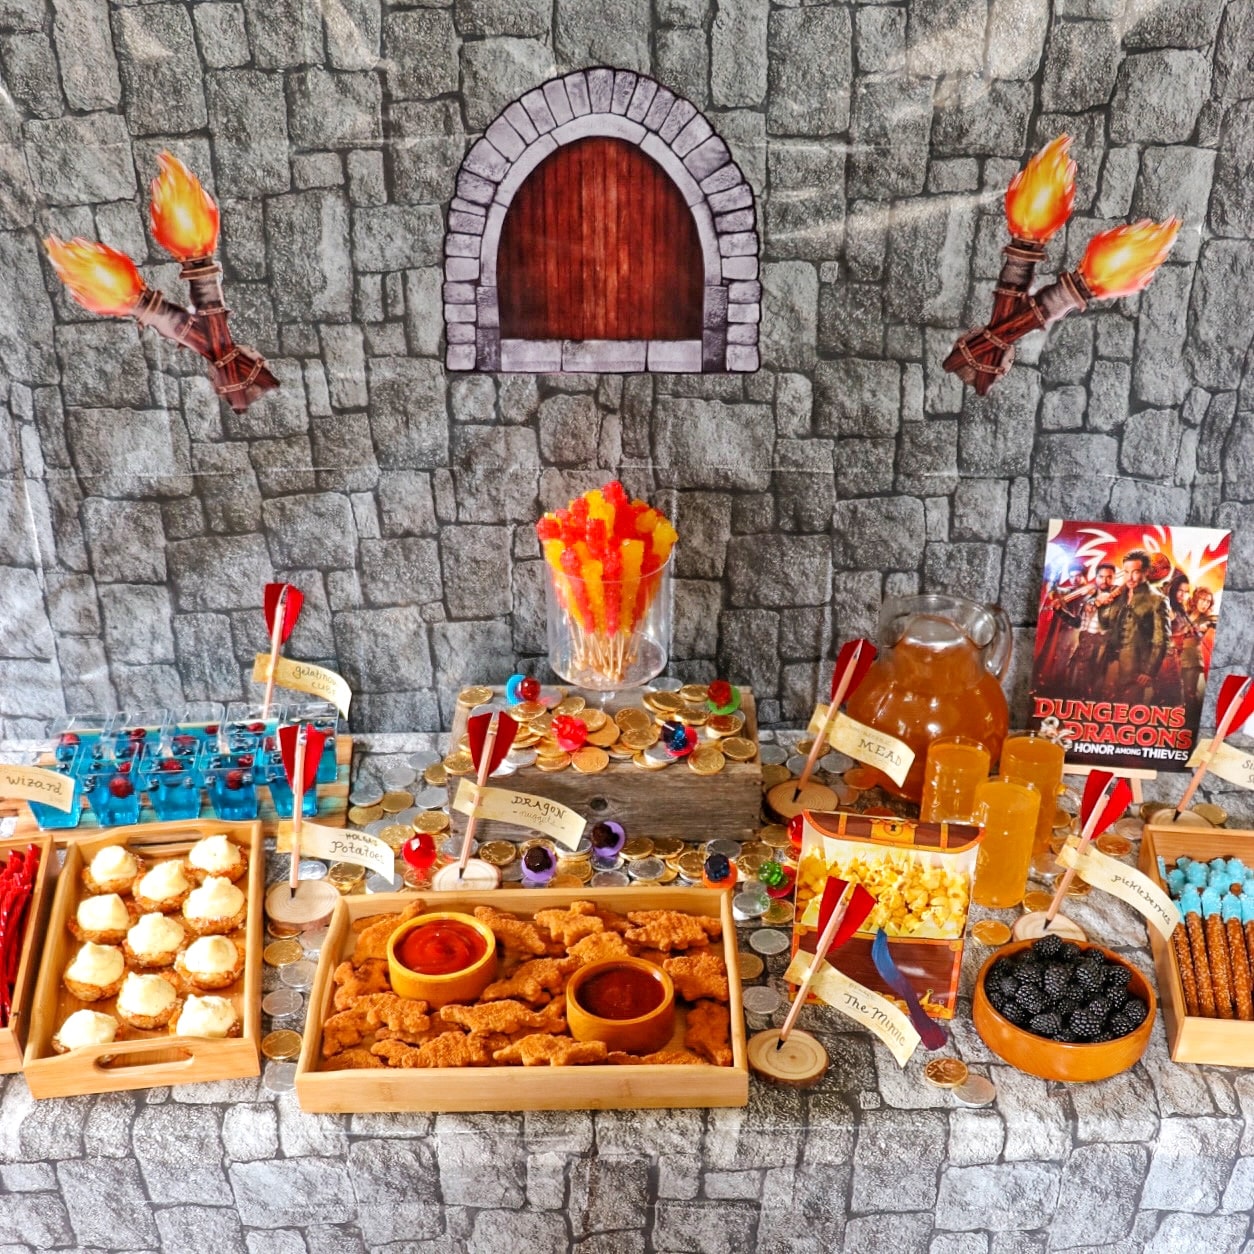 Dungeons and Dragons party food